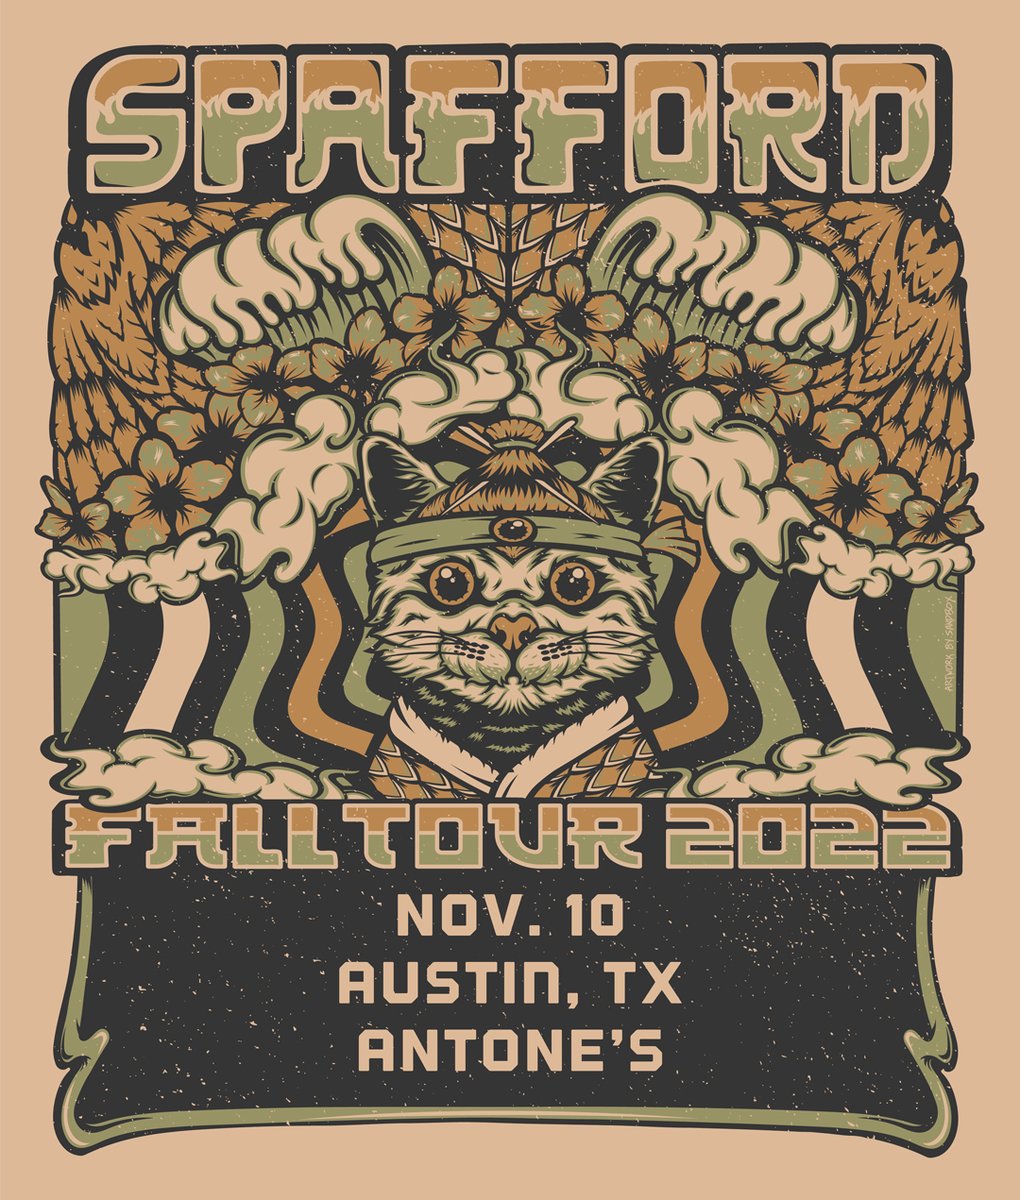 Funk outfit @spaffordmusic are making their way back to Antone's in just a few weeks! @vibenforfree kick off the show on November 10. Tickets ➡️ bit.ly/3aNPrhU